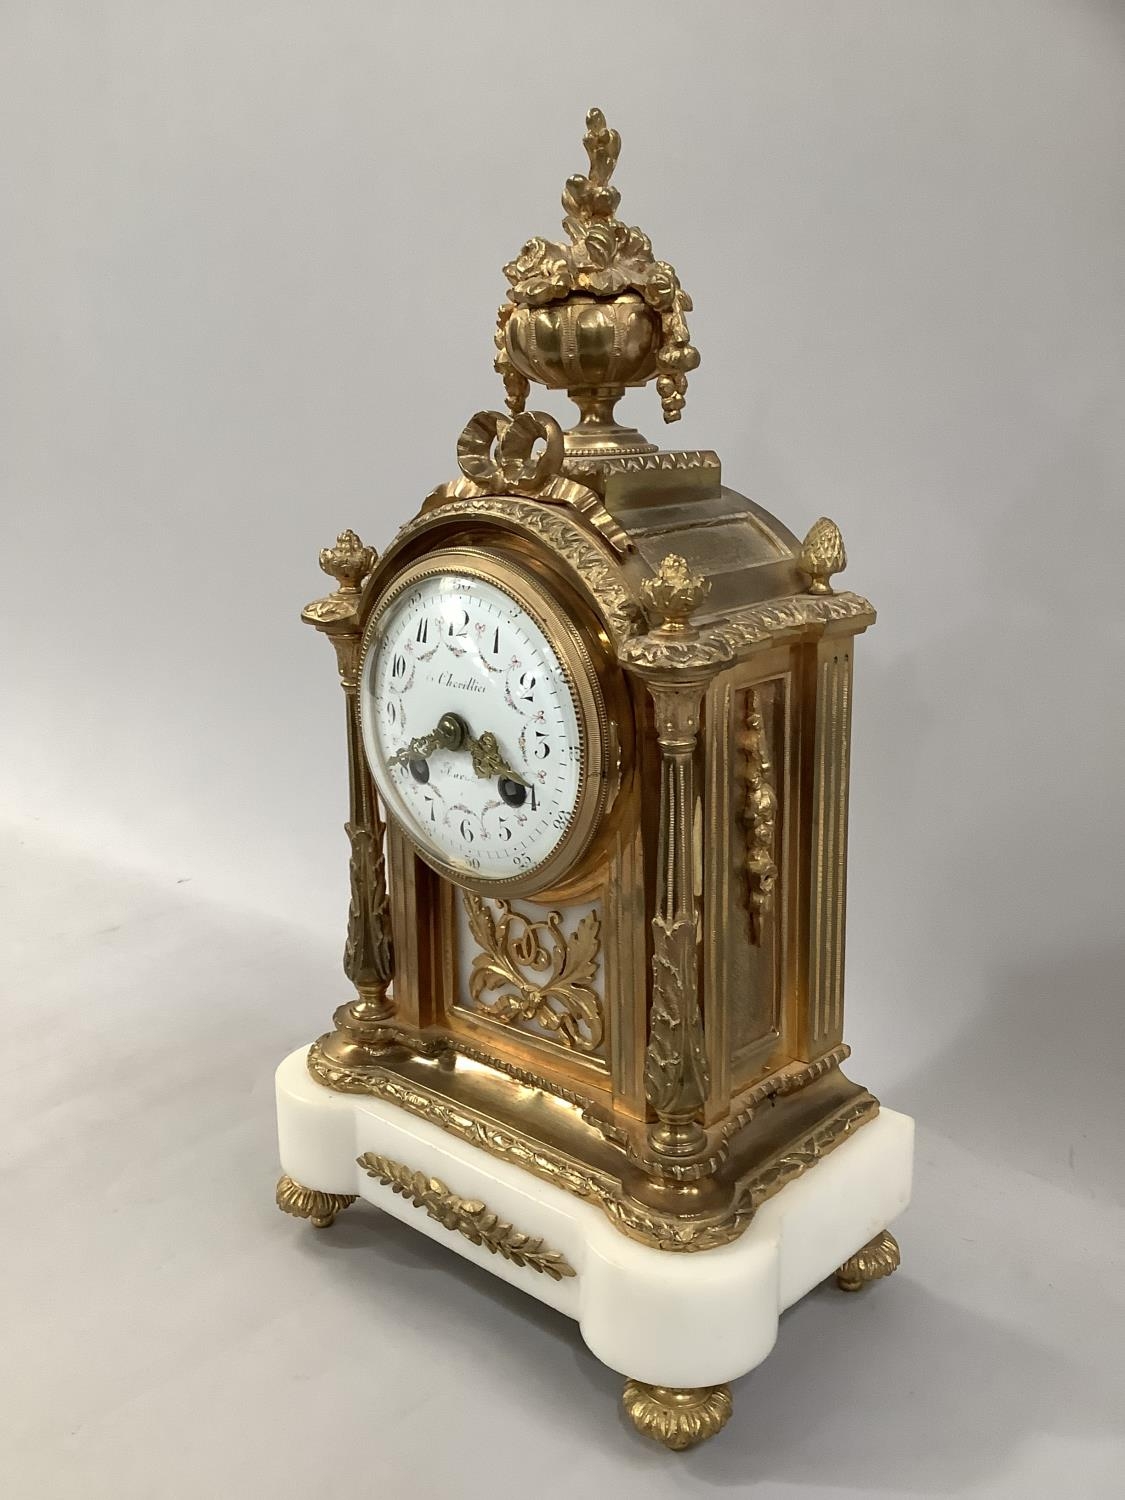 A 19TH CENTURY FRENCH ORMOLU AND ALABASTER CLOCK, with 8 day pendulum movement striking on one bell, - Image 2 of 5